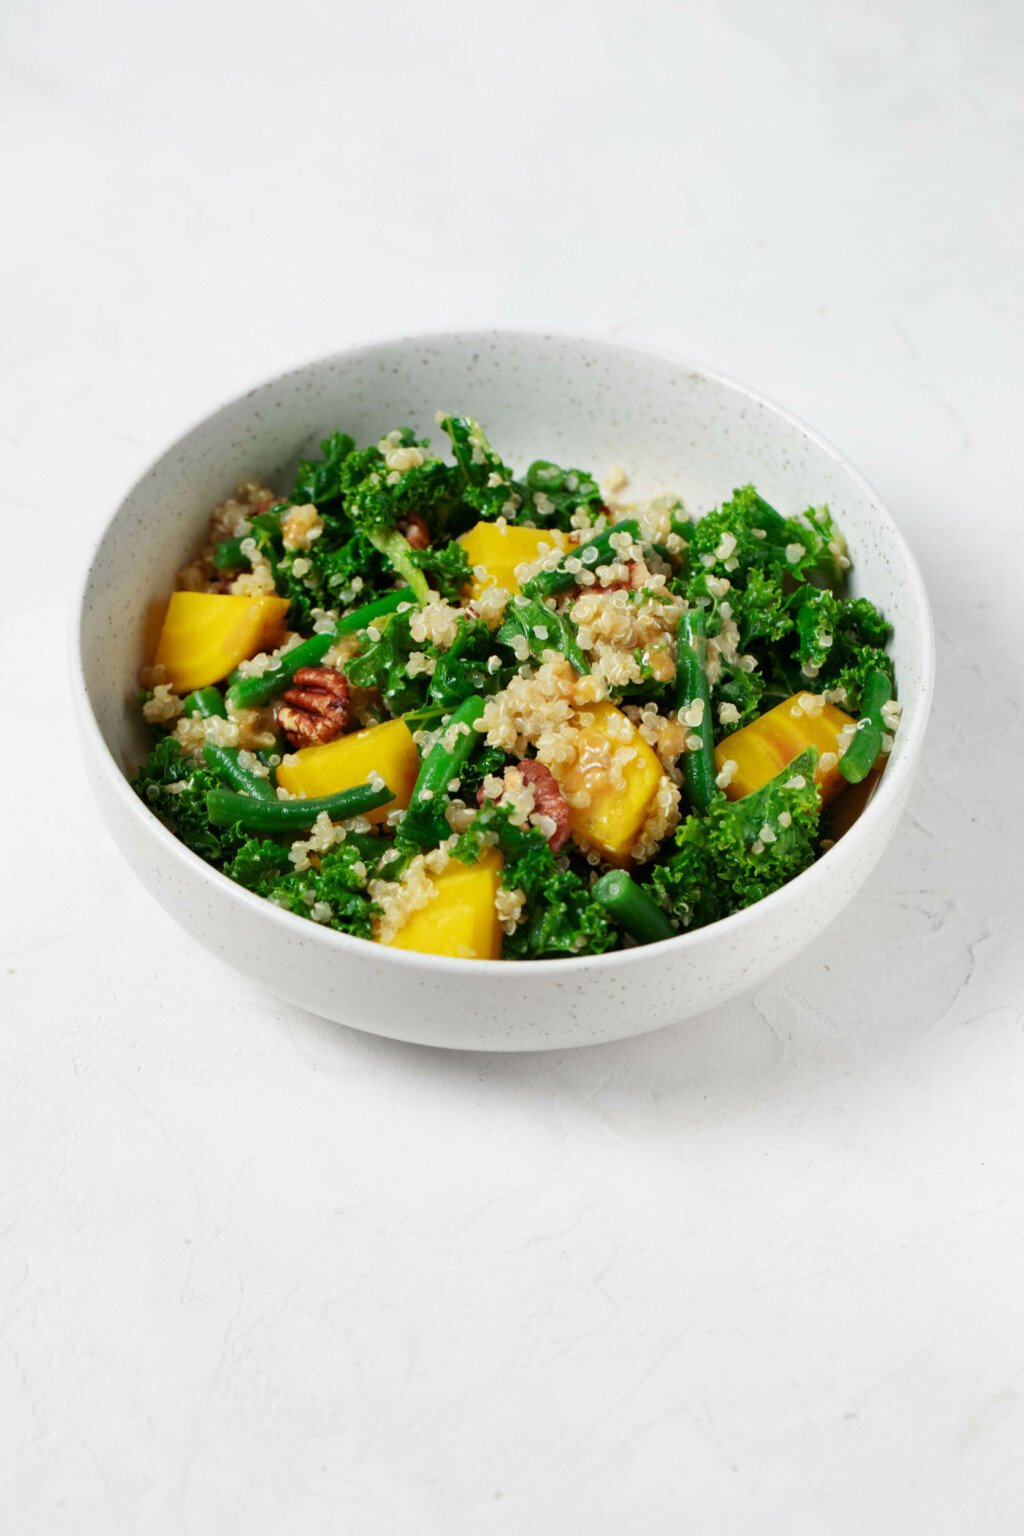 An image of a white bowl, which is filled with a vibrantly-colored kale, golden beet, green bean, and quinoa salad. There are brown pieces of toasted pecan throughout.